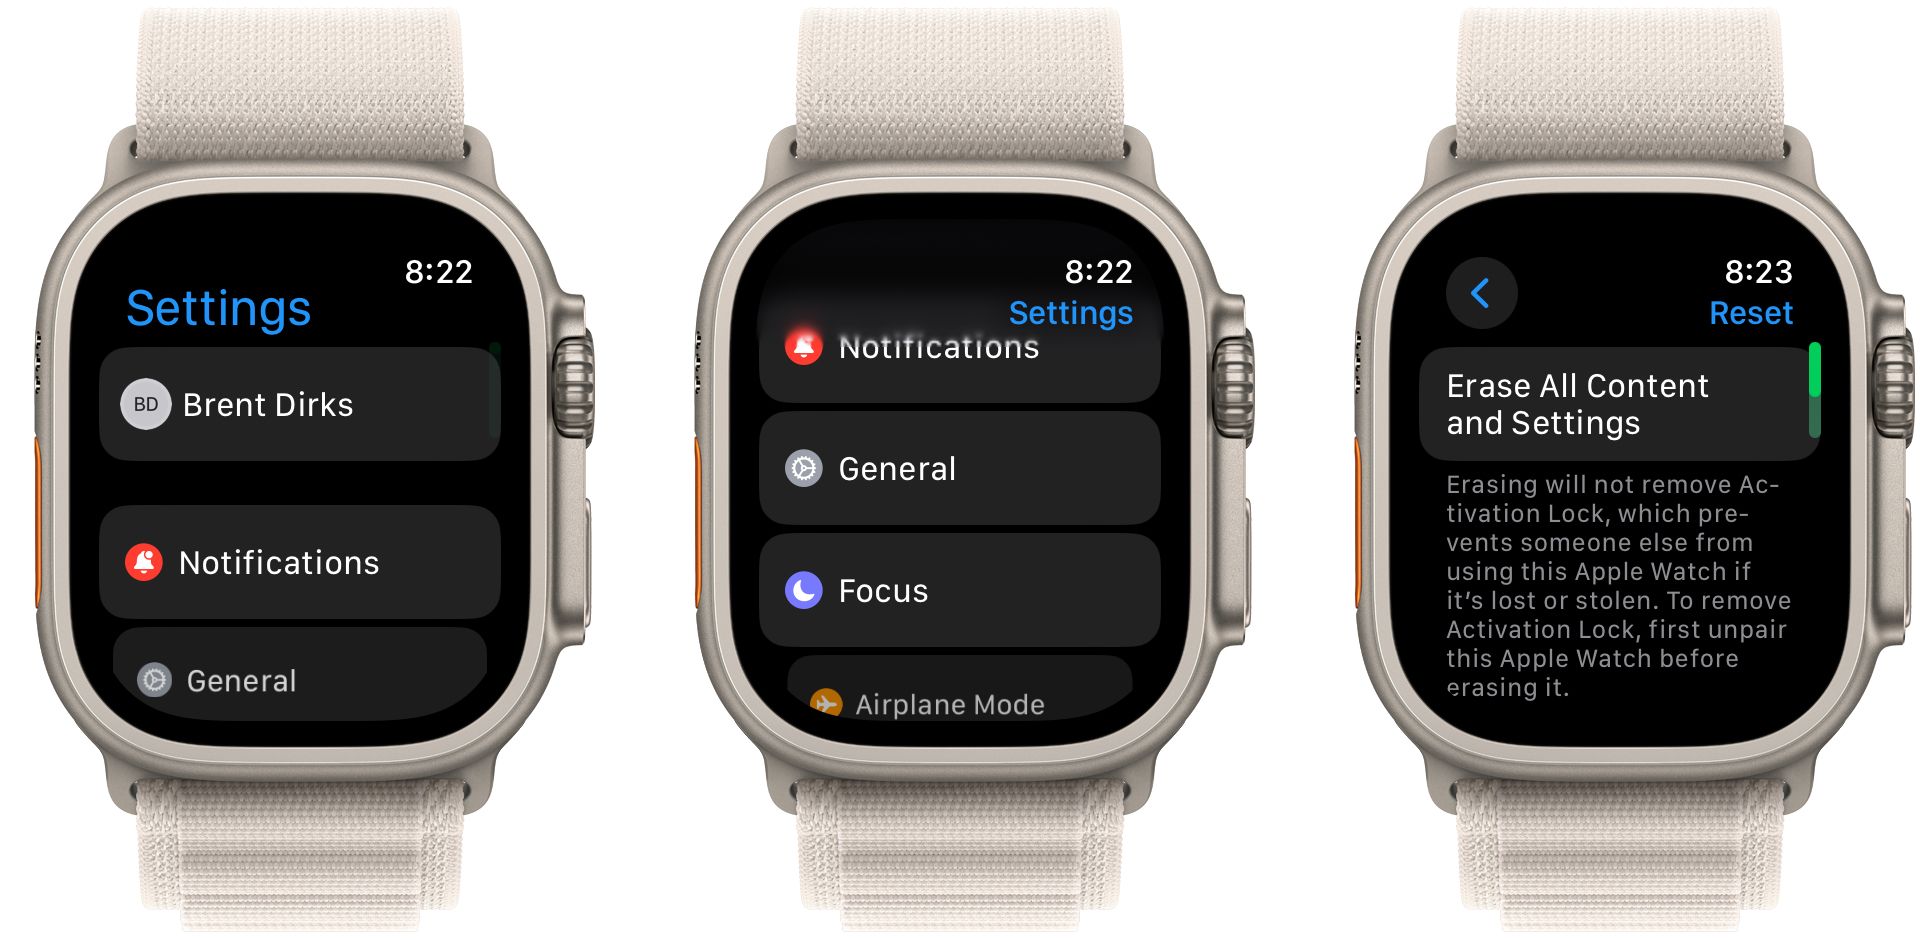 How to Pair Your Apple Watch to a New iPhone